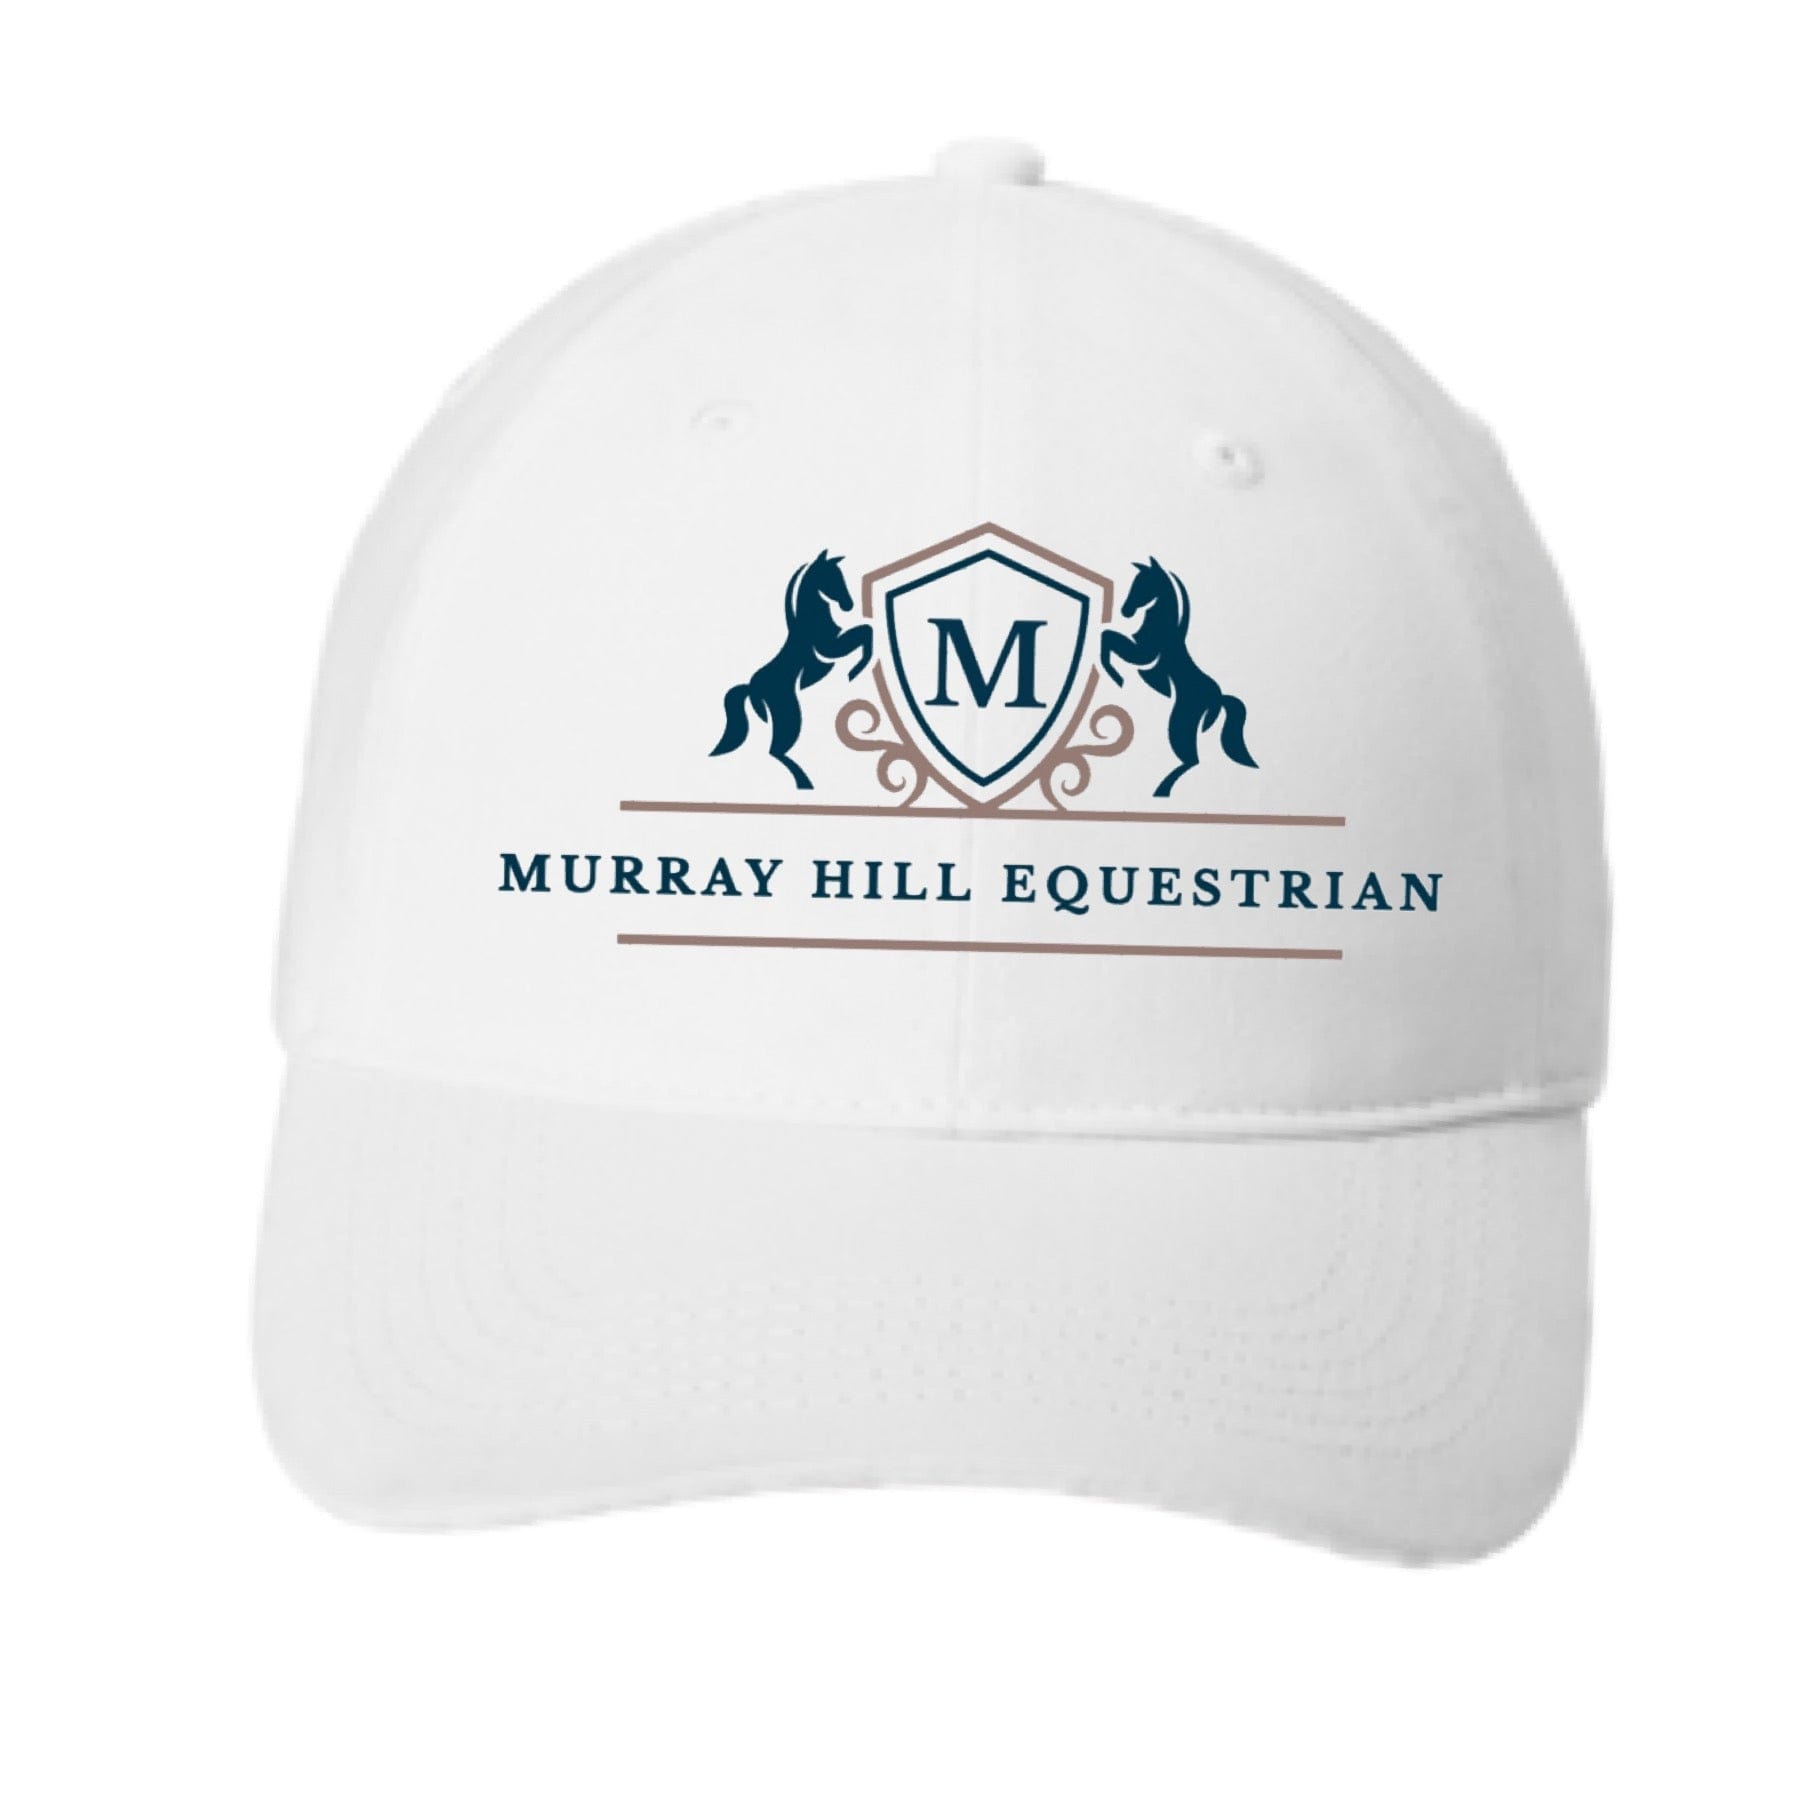 Equestrian Team Apparel White Murray Hill Equestrian Baseball Cap equestrian team apparel online tack store mobile tack store custom farm apparel custom show stable clothing equestrian lifestyle horse show clothing riding clothes horses equestrian tack store